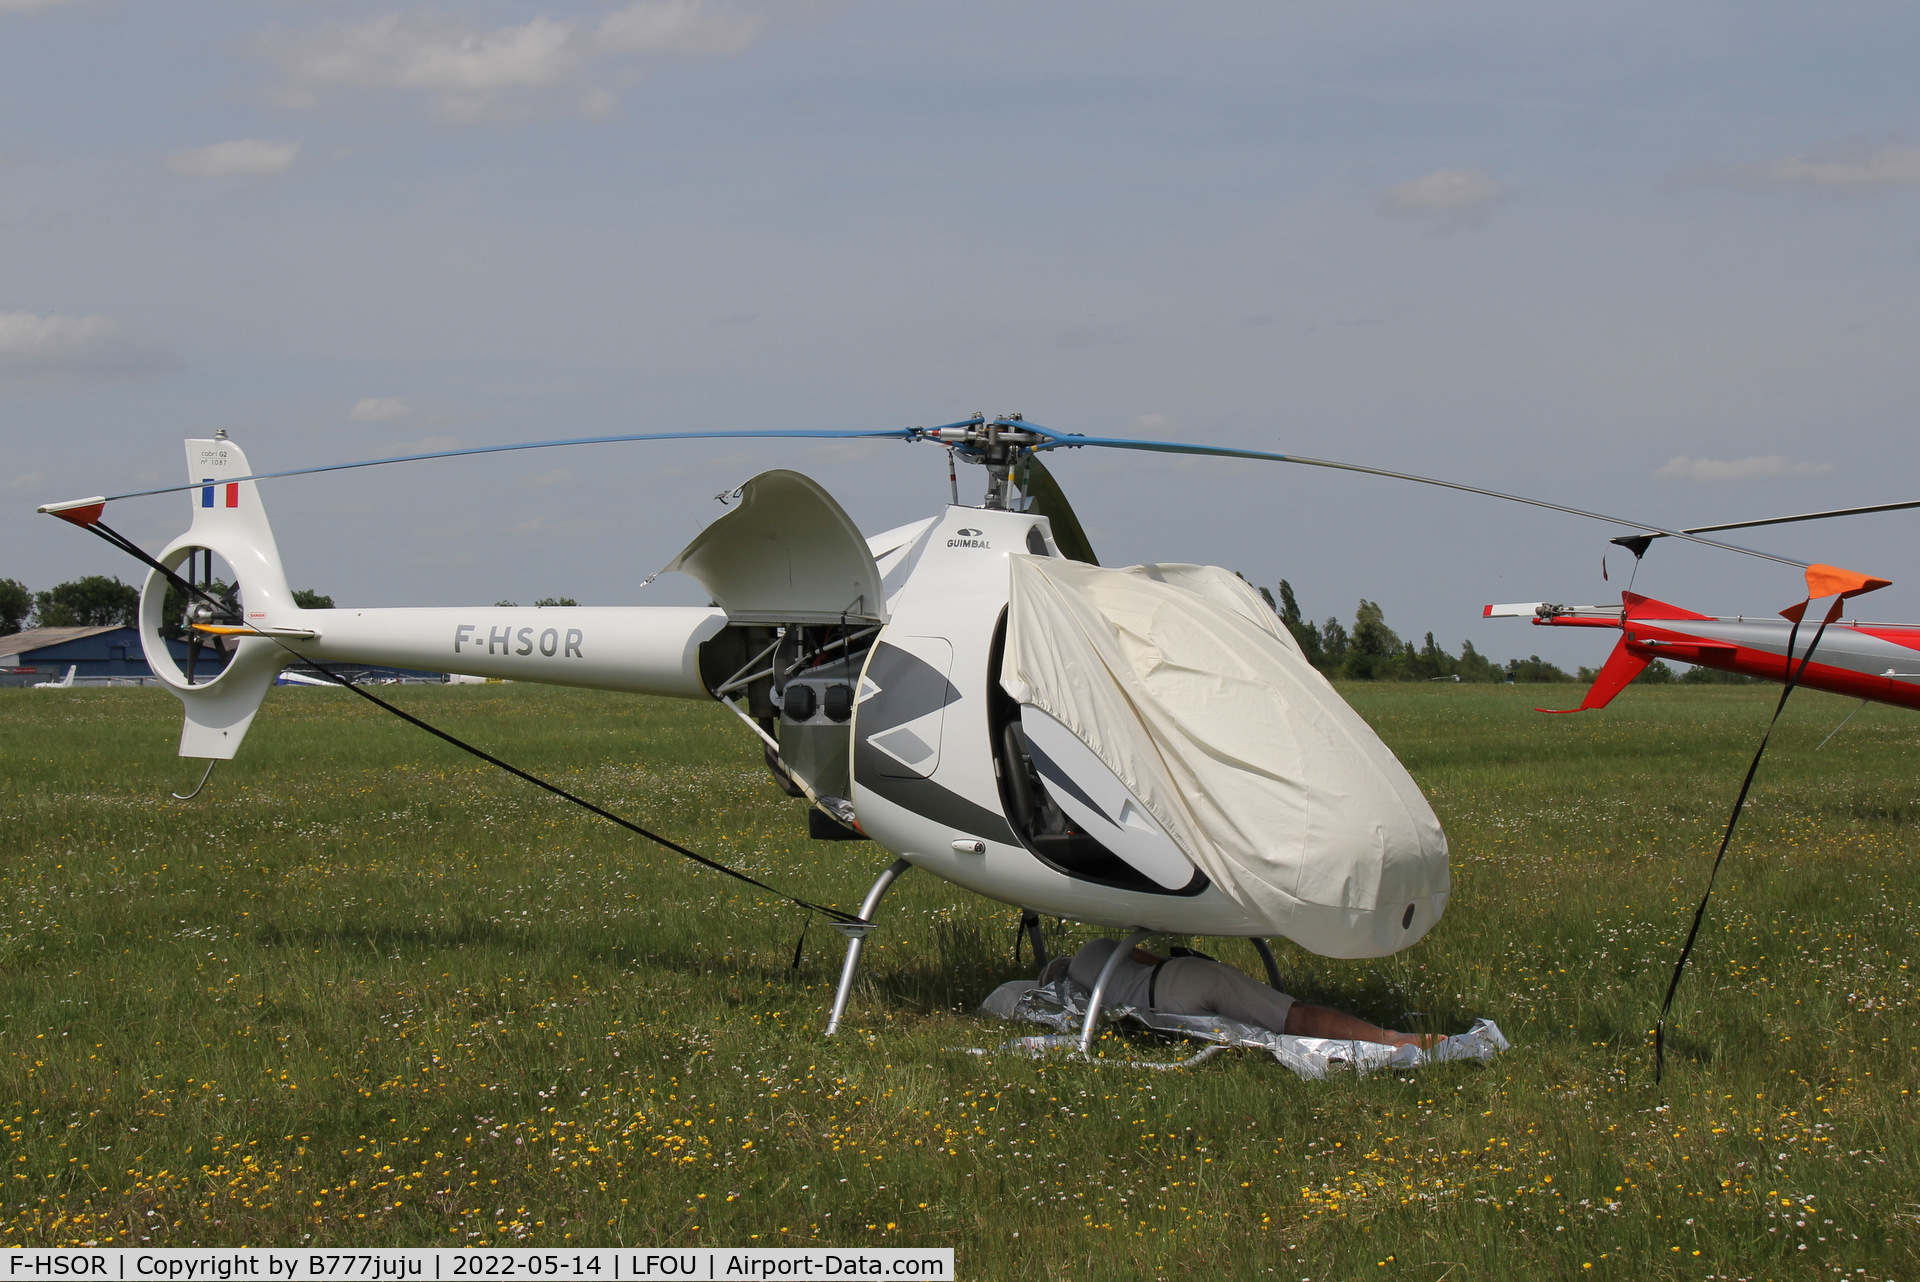 F-HSOR, 2014 Guimbal Cabri G2 C/N 1087, at Helico 2022 Cholet